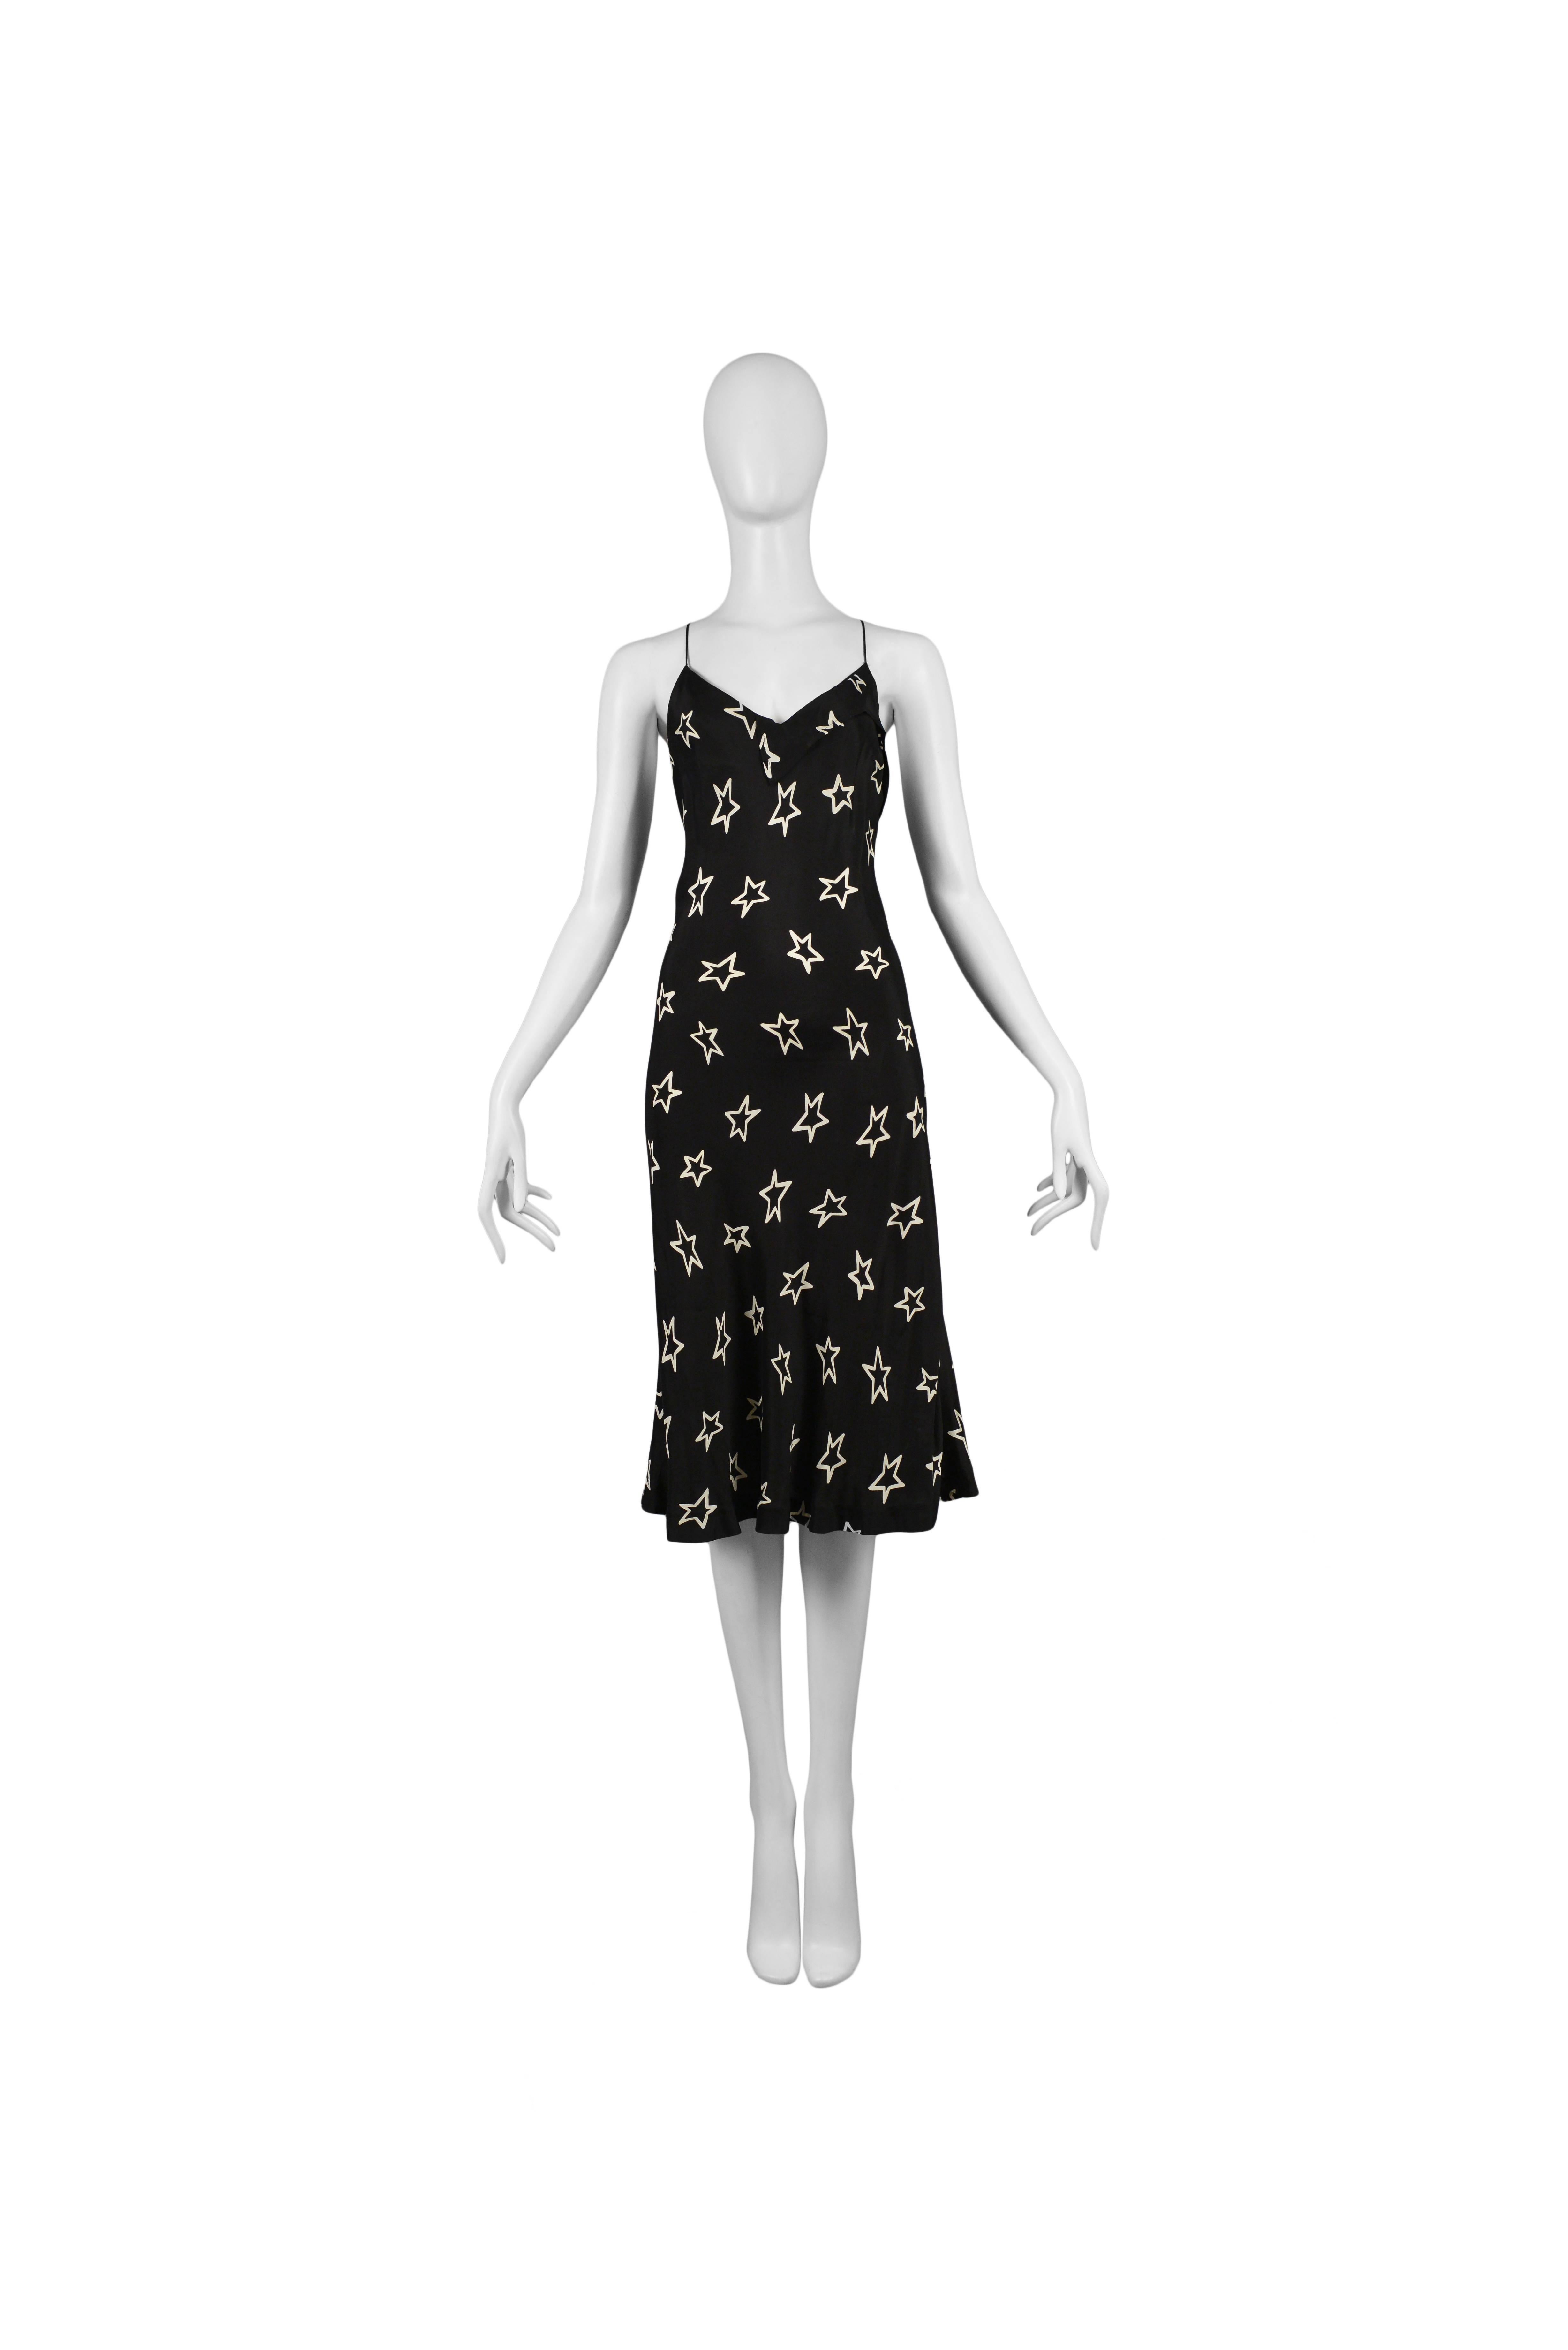 Vintage Maison Martin Margiela black slip dress featuring a v-neckline and an allover white star pattern. Circa Spring / Summer 2007.
Please inquire for additional images.